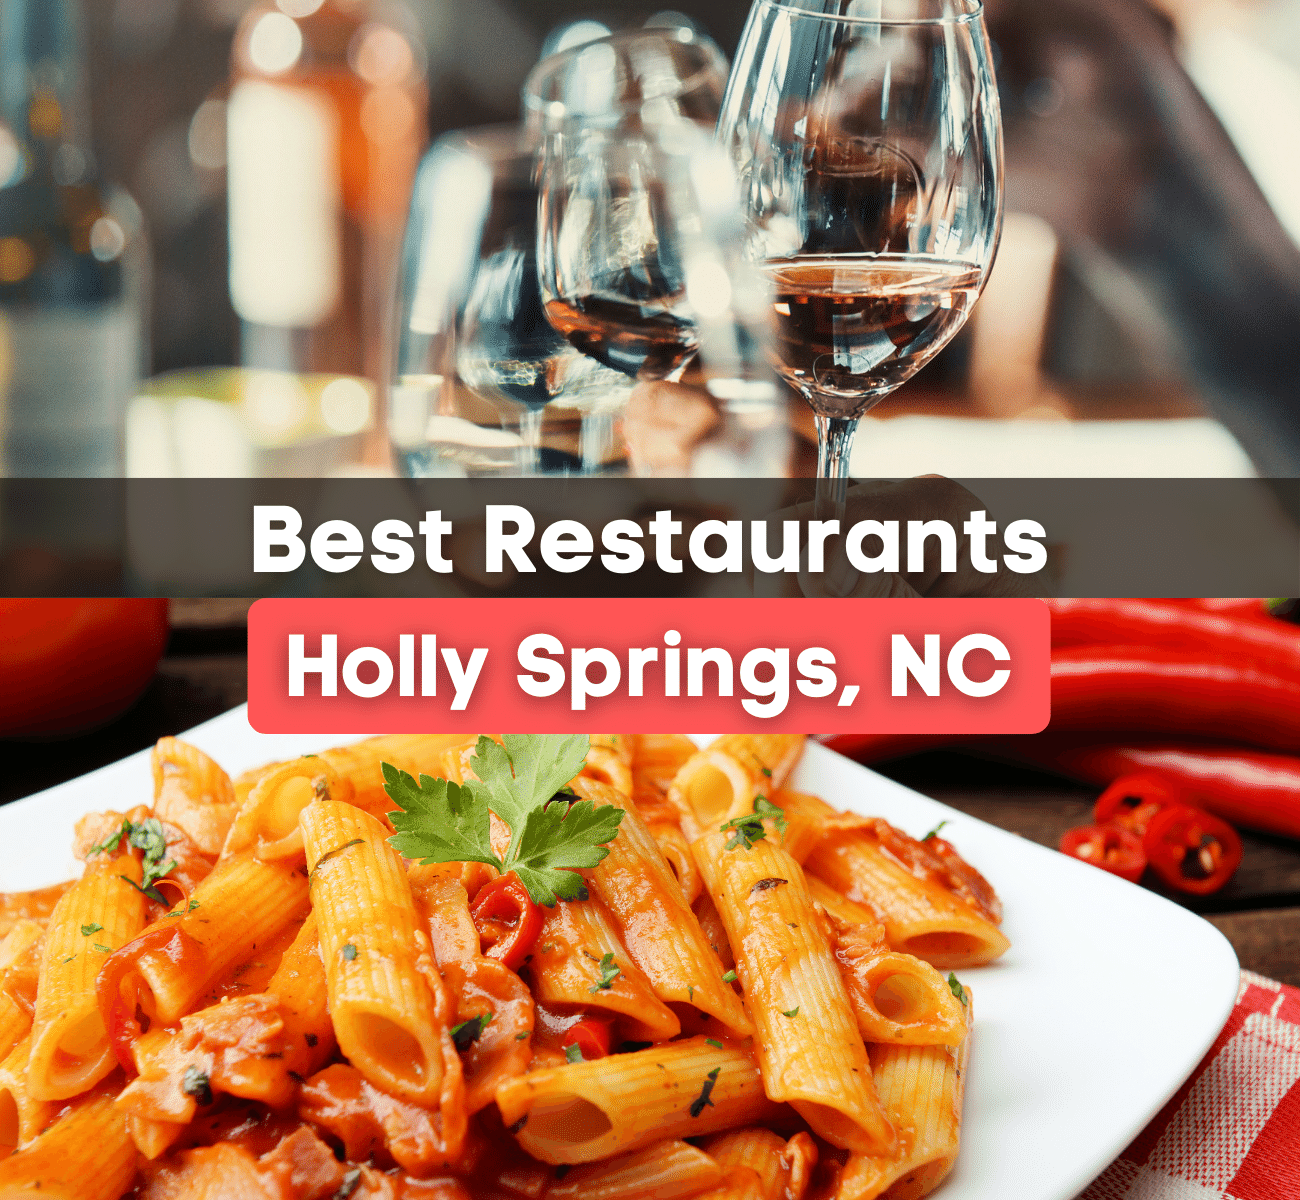 Pasta and wine best restaurants in Holly Springs, NC 